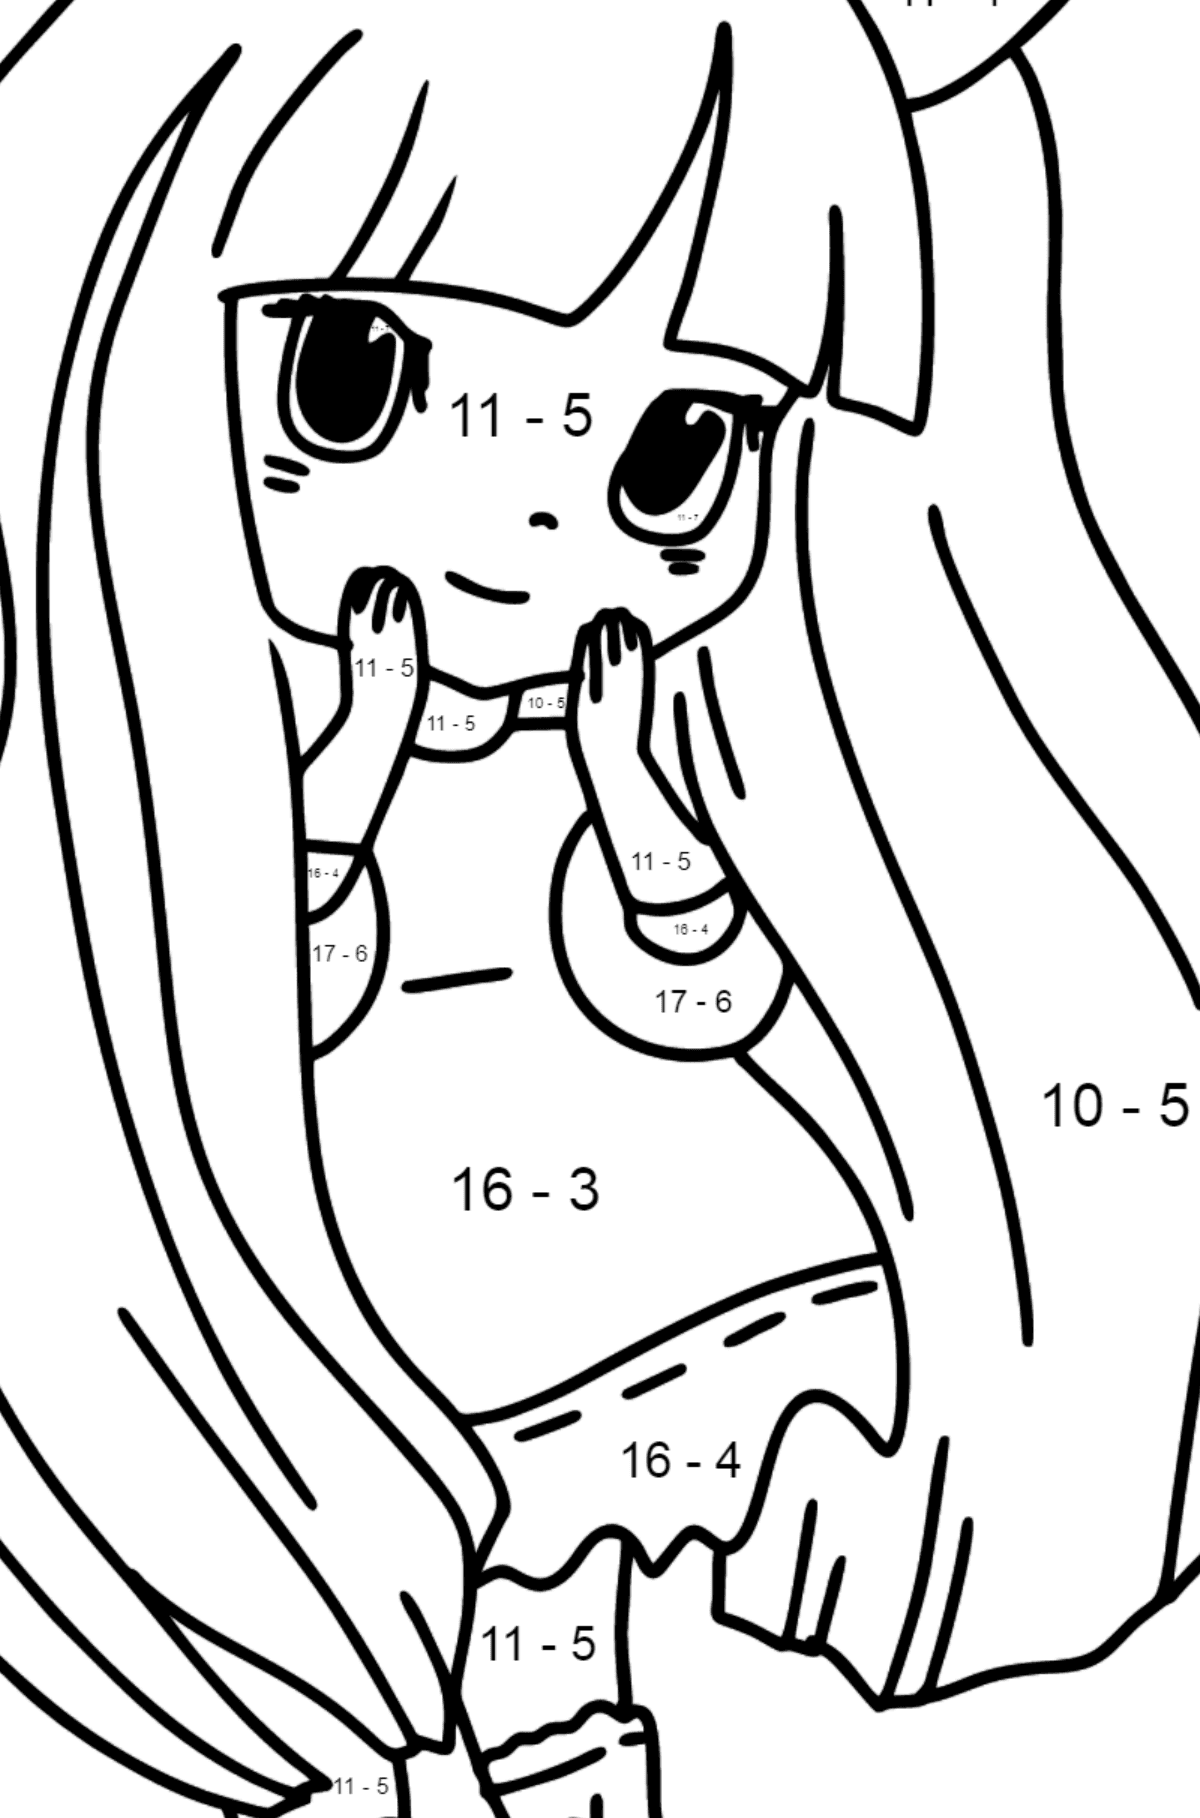 Anime Bunny Girl Coloring Pages - Math Coloring - Subtraction for Kids